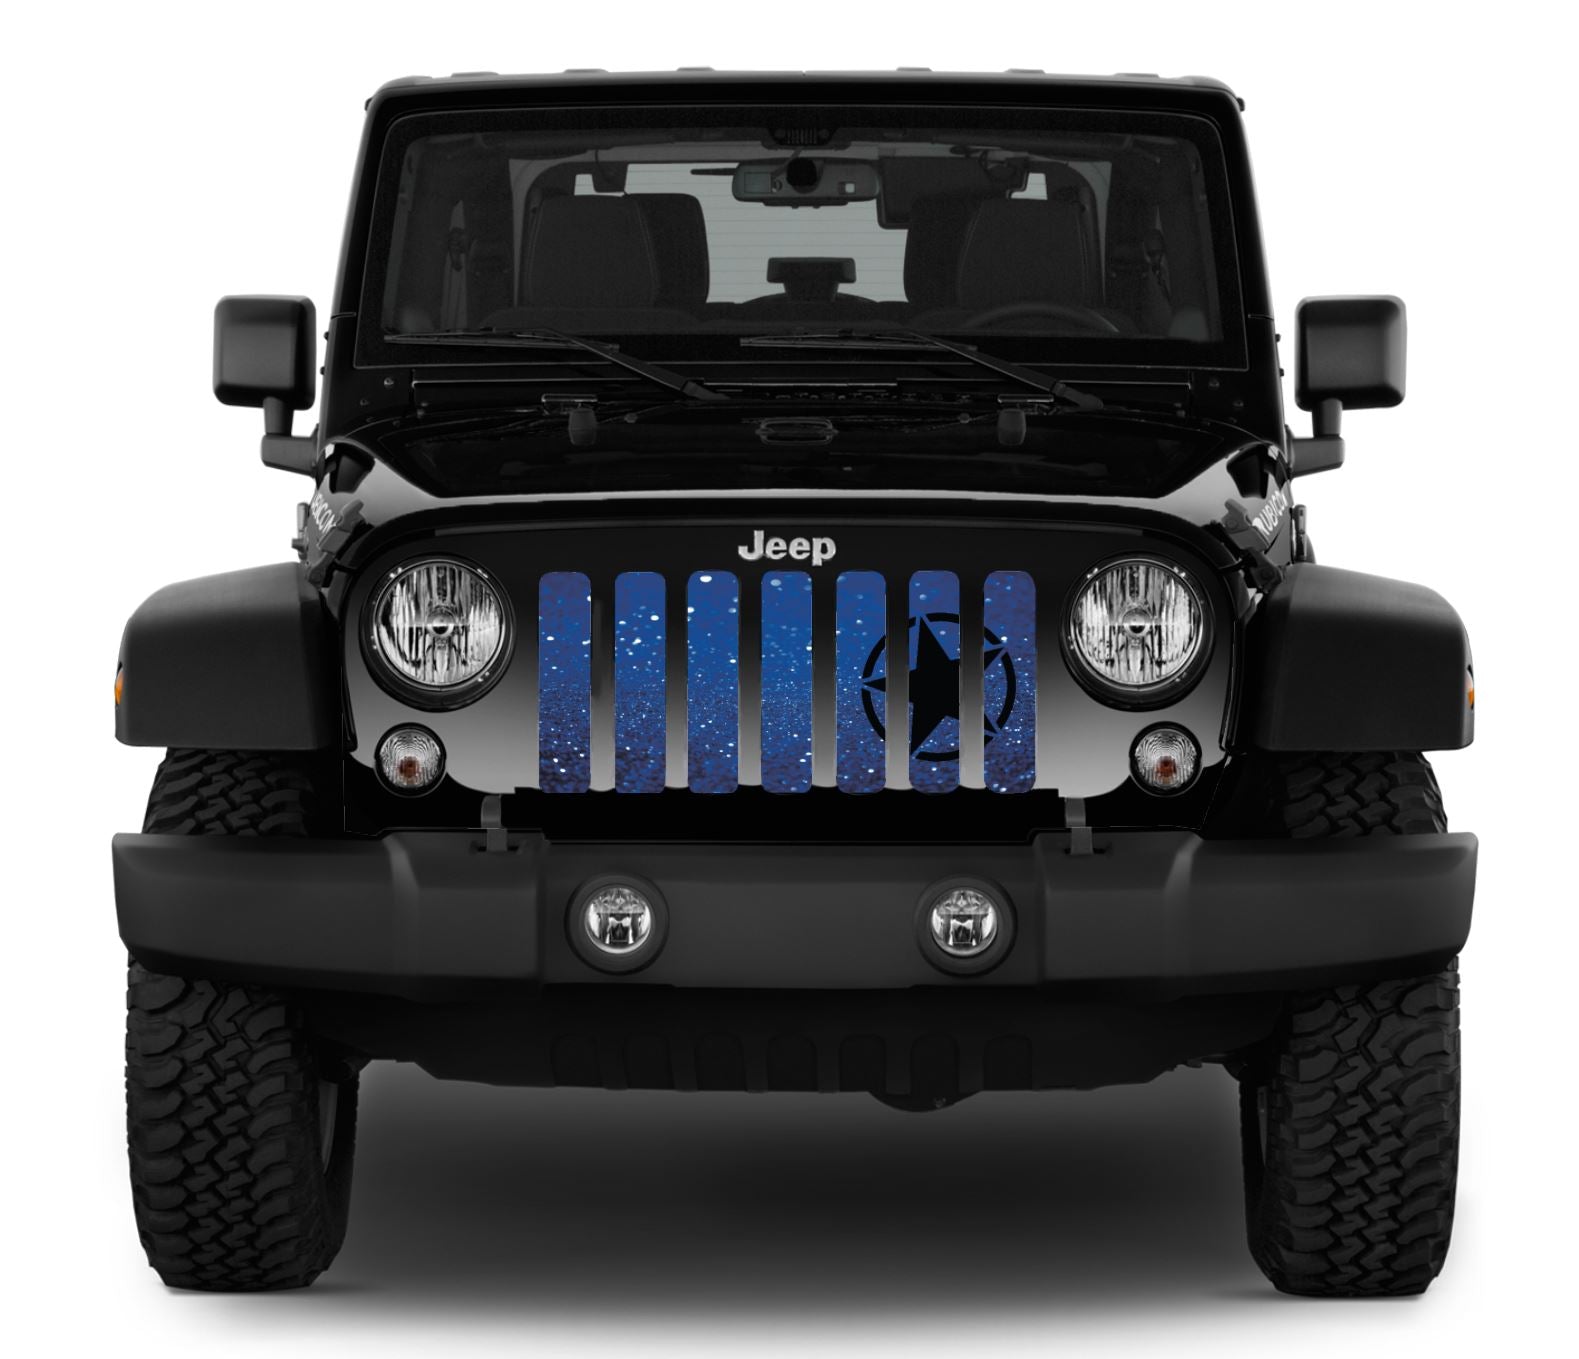 Jeep Wrangler Oscar Mike Royal Blue Grille Insert | Dirty Acres